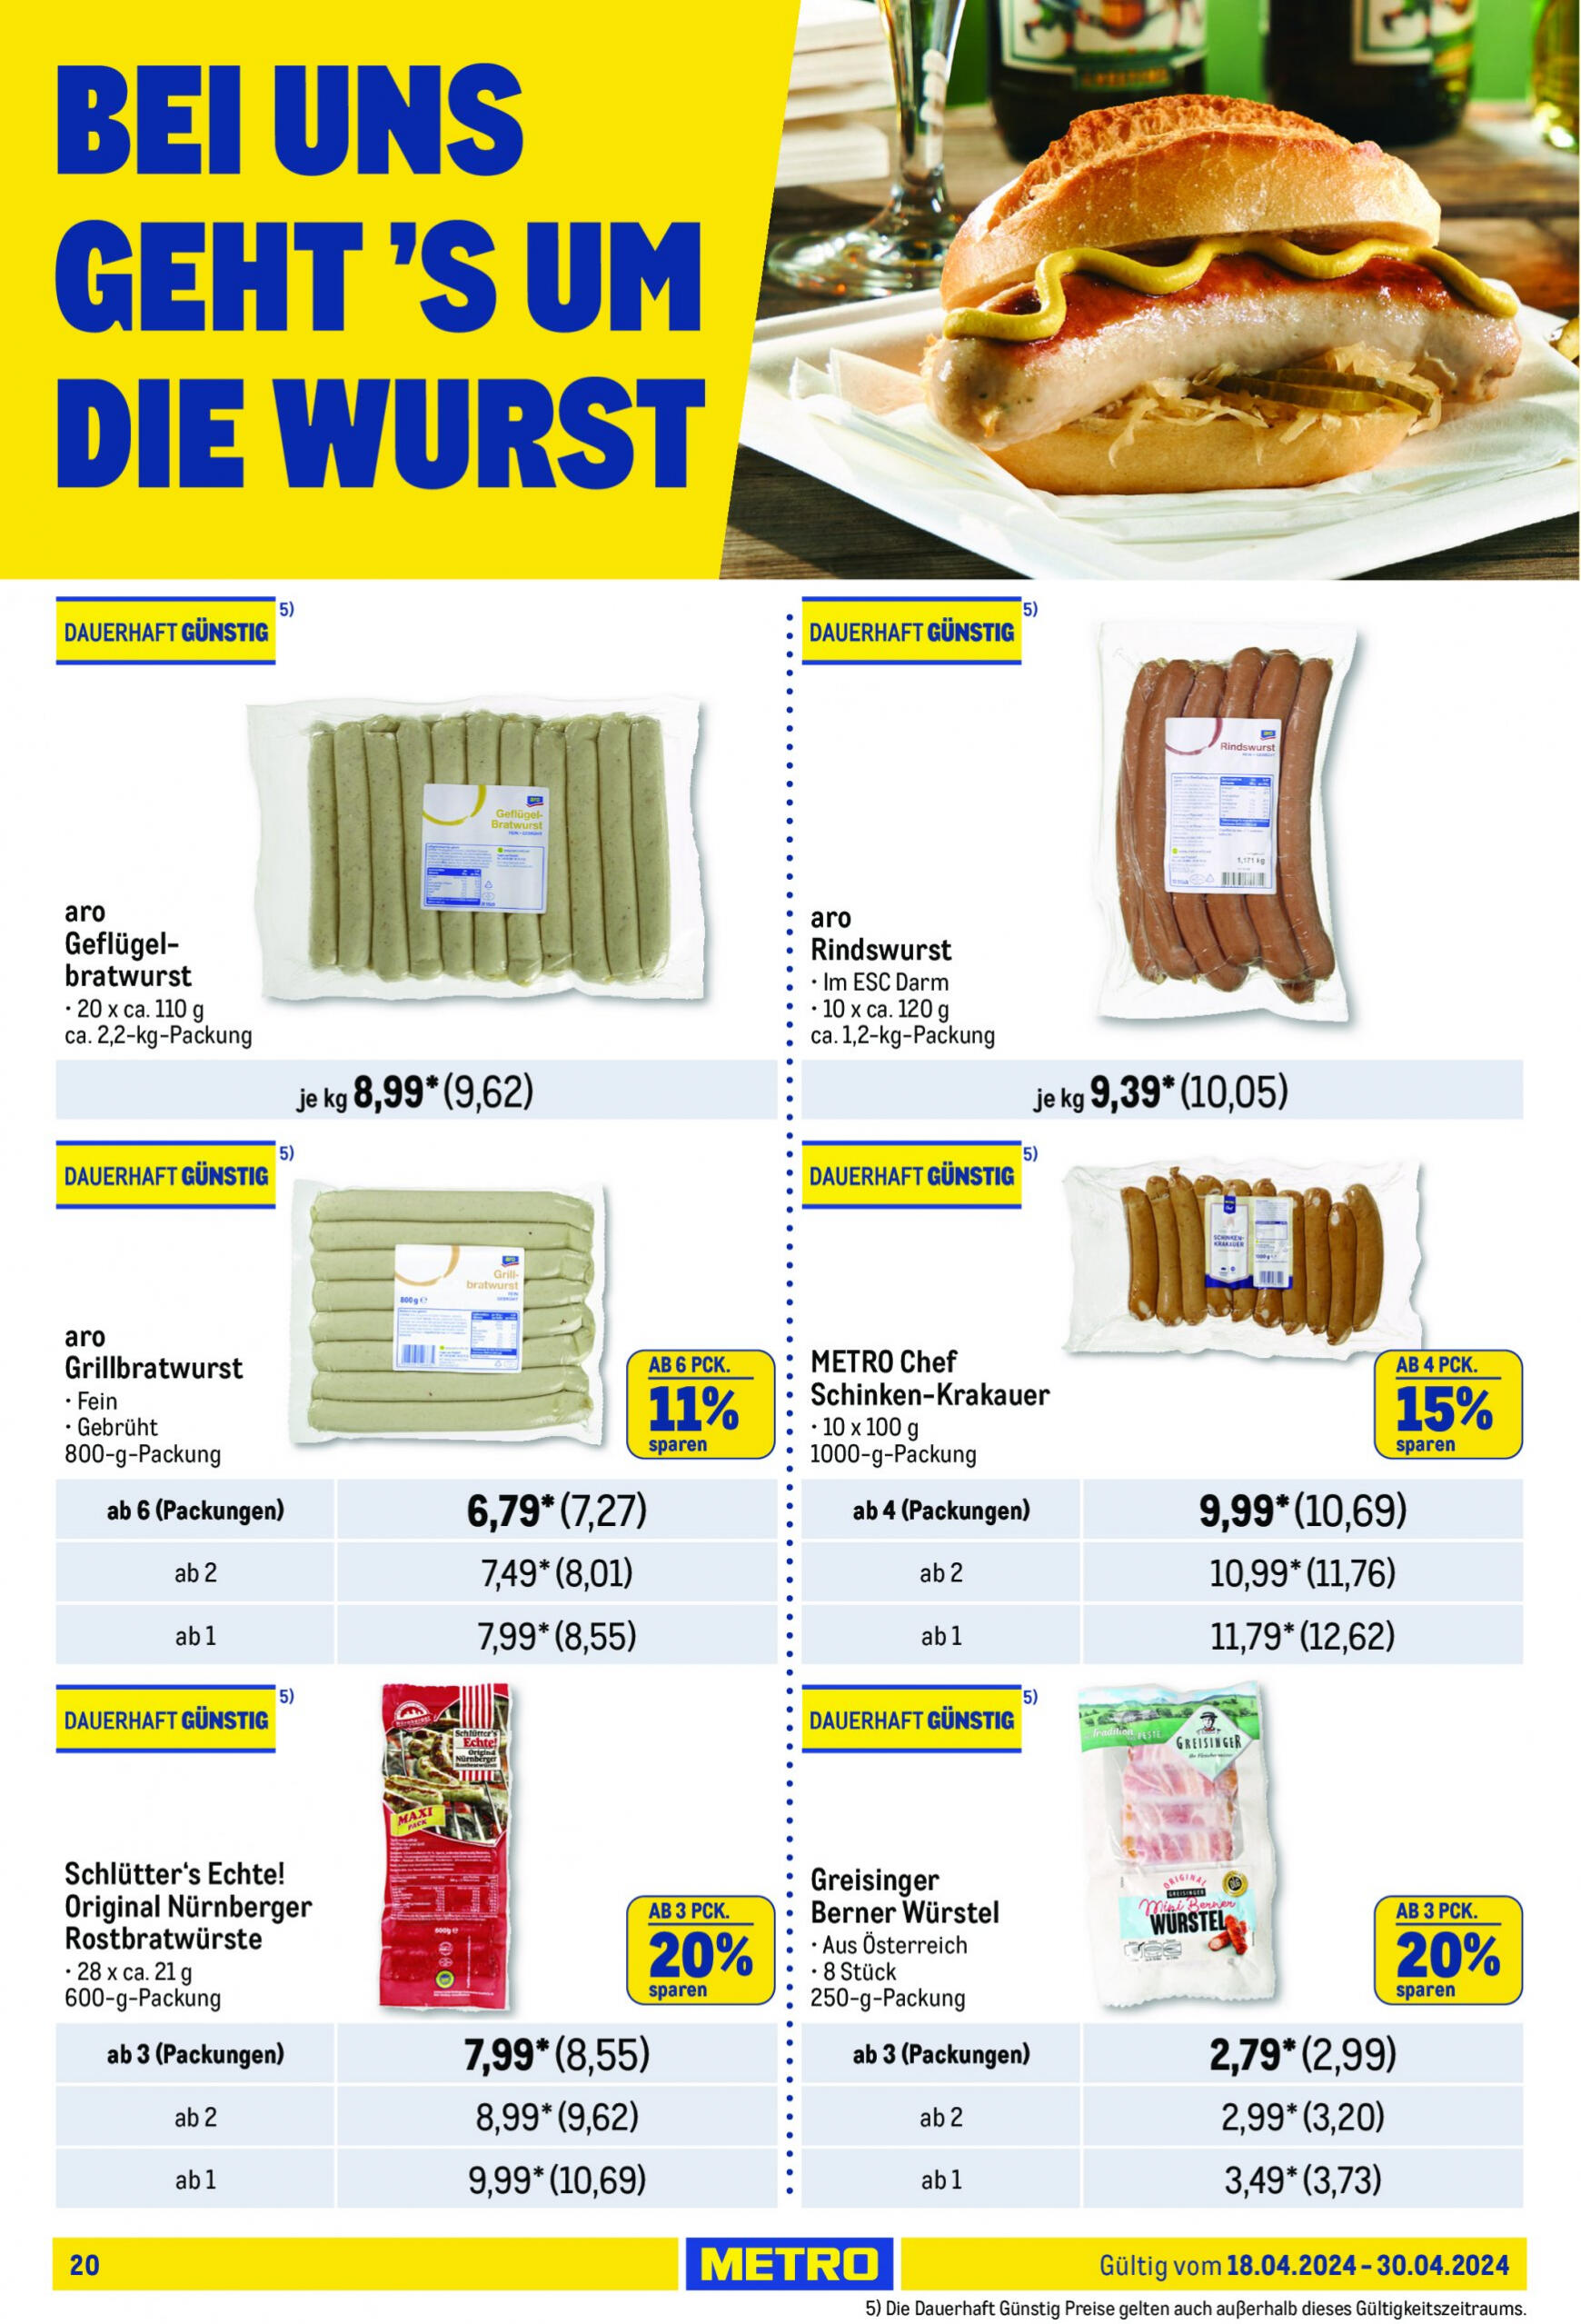 metro - Flyer Metro - Food-NonFood aktuell 18.04. - 30.04. - page: 20